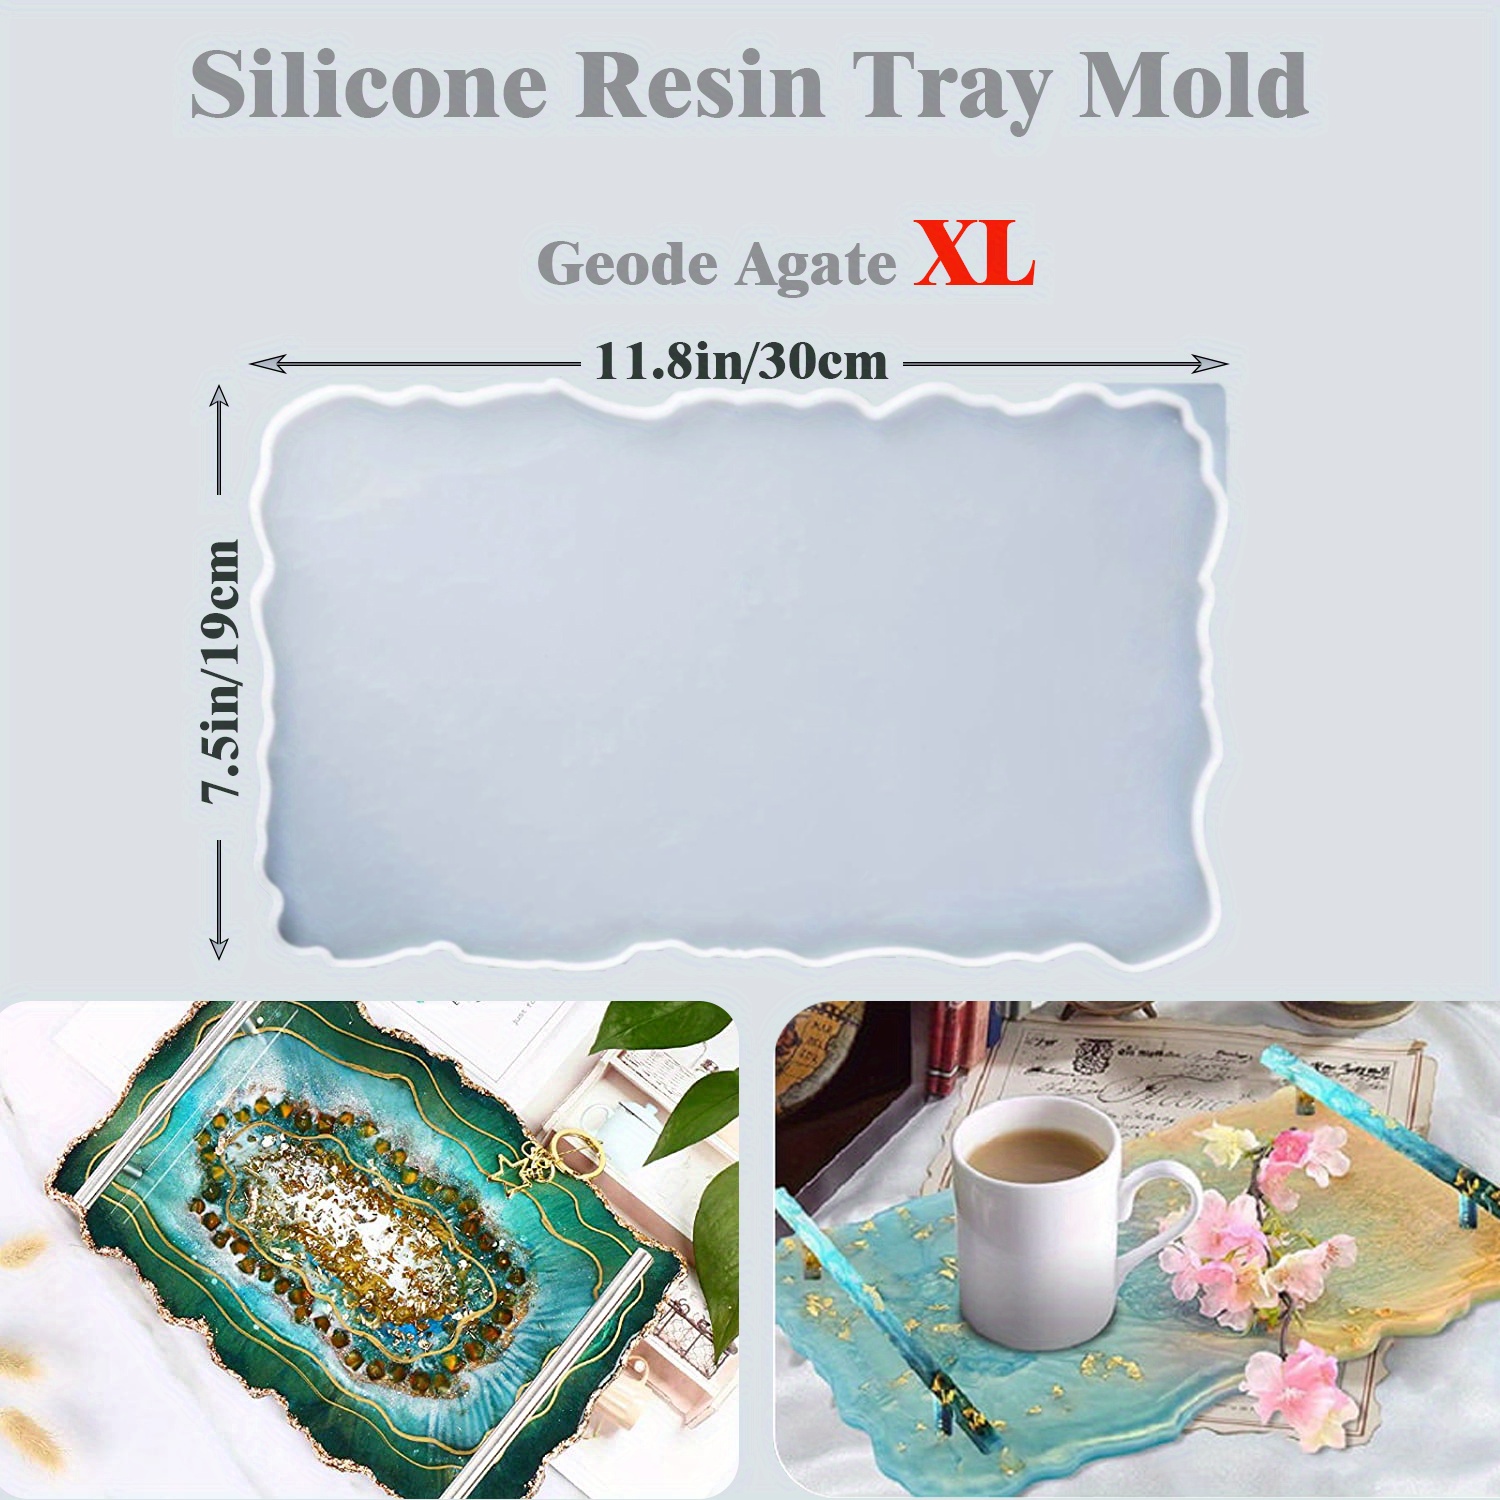 Wavy Tray Mold Casting Molds for Making Faux Agate Tray